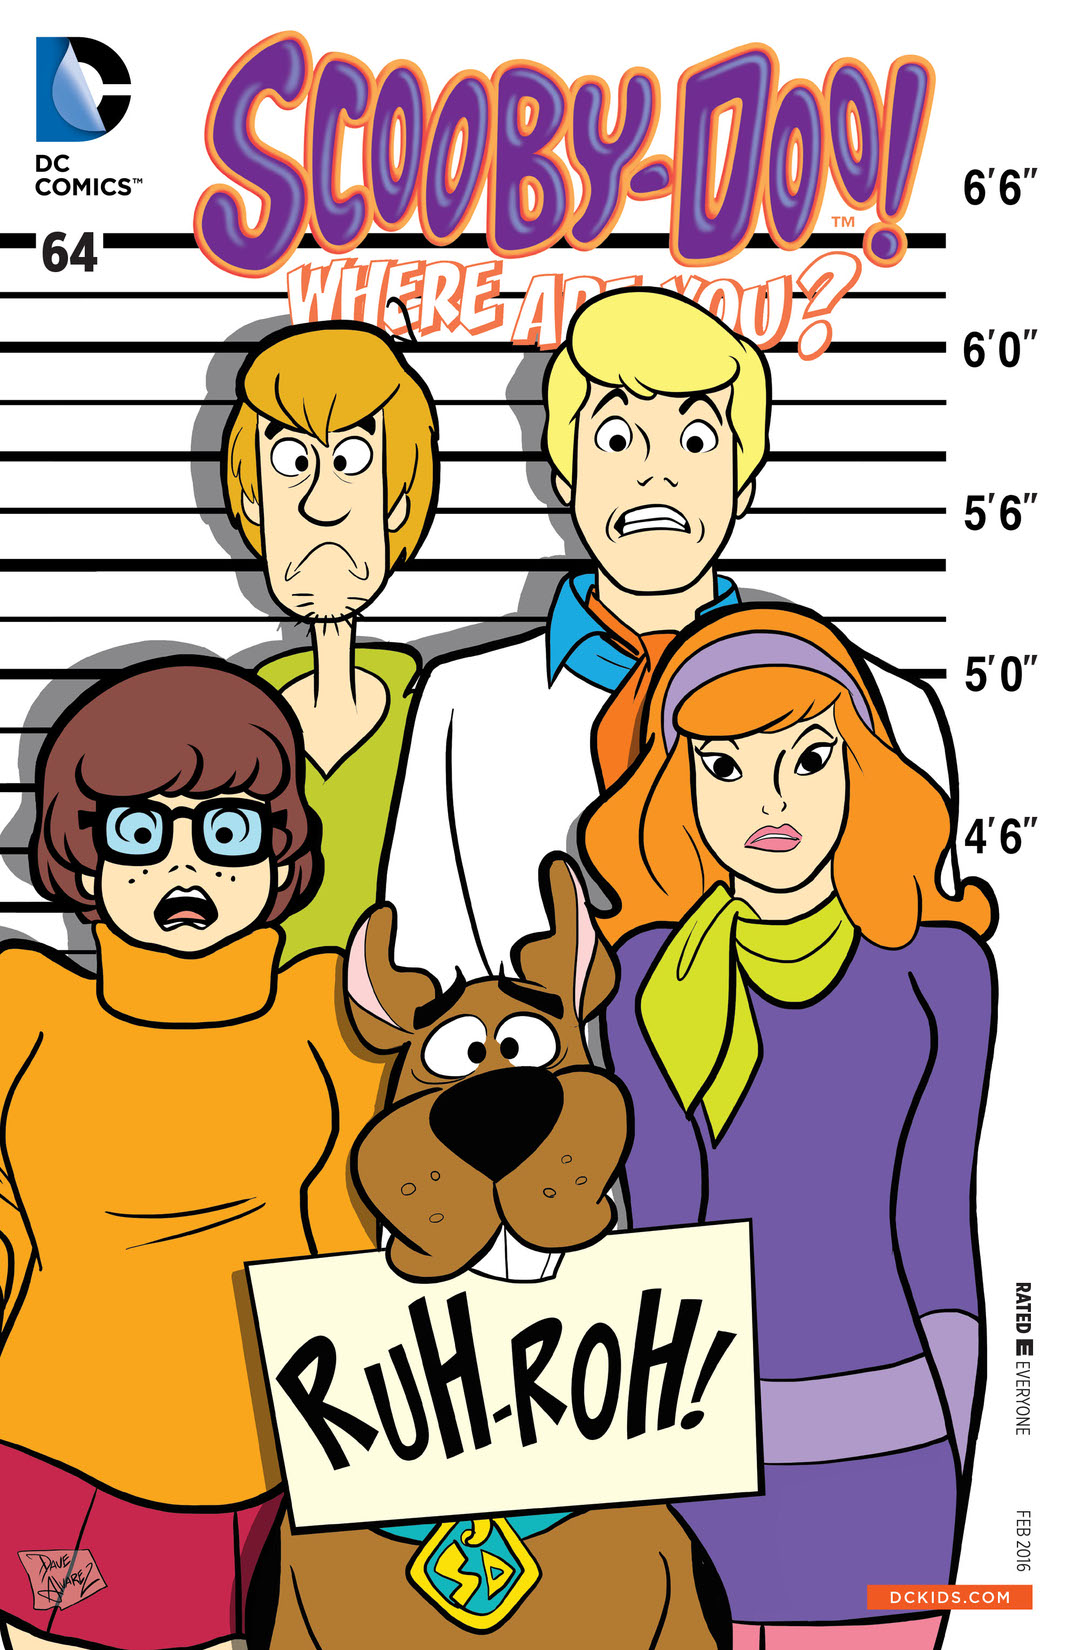 Scooby-Doo, Where Are You? #64 preview images